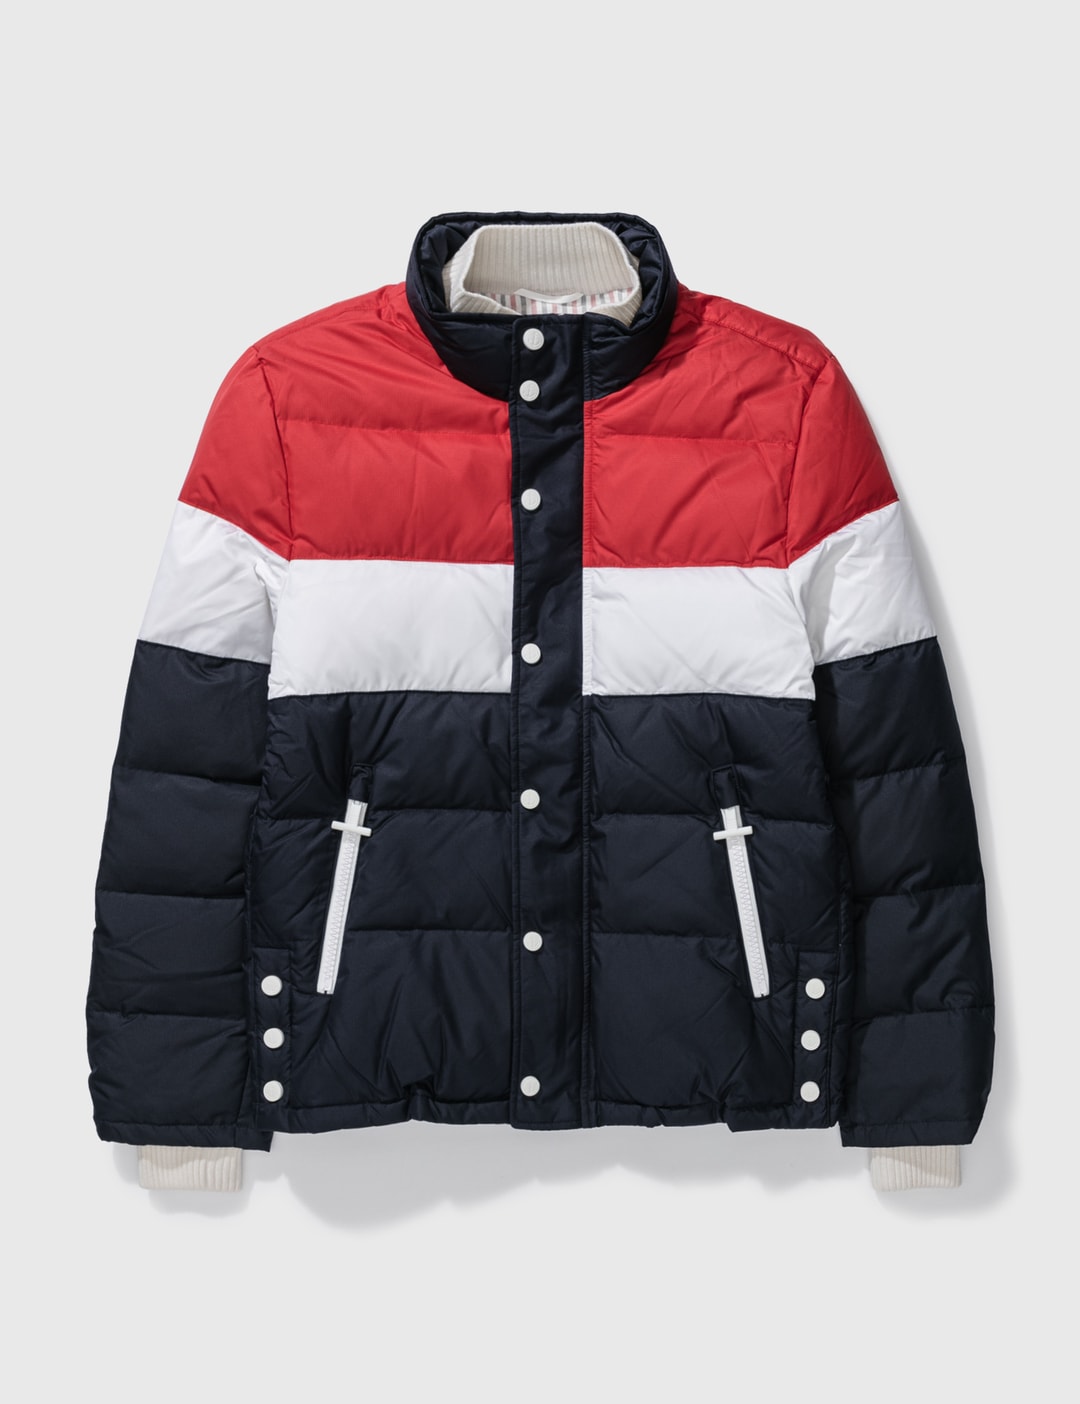 THOM BROWNE 3 COLOR TONE ZIPUP DOWN JACKET Placeholder Image